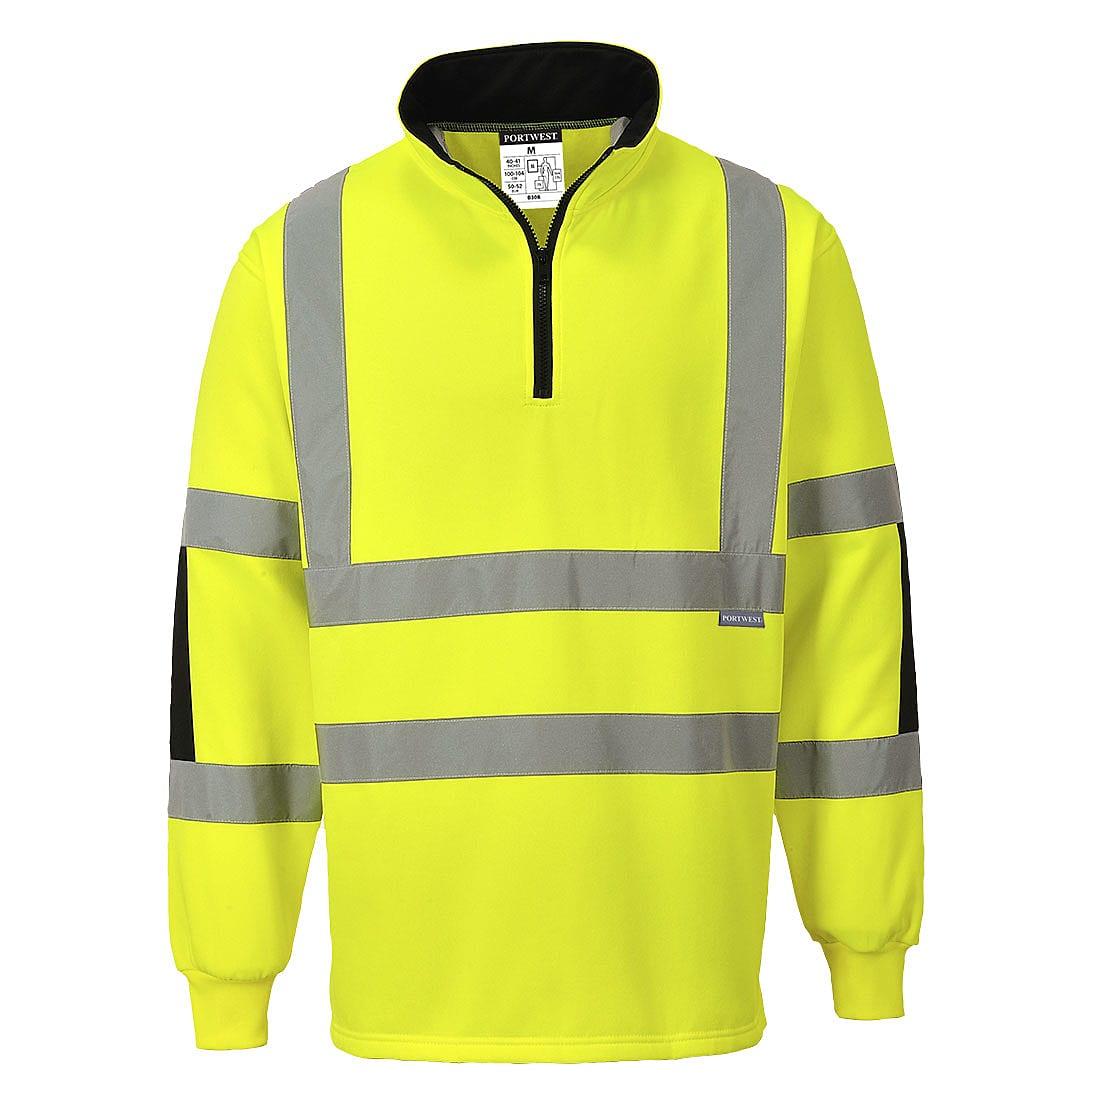 Portwest Xenon Rugby Shirt in Yellow (Product Code: B308)